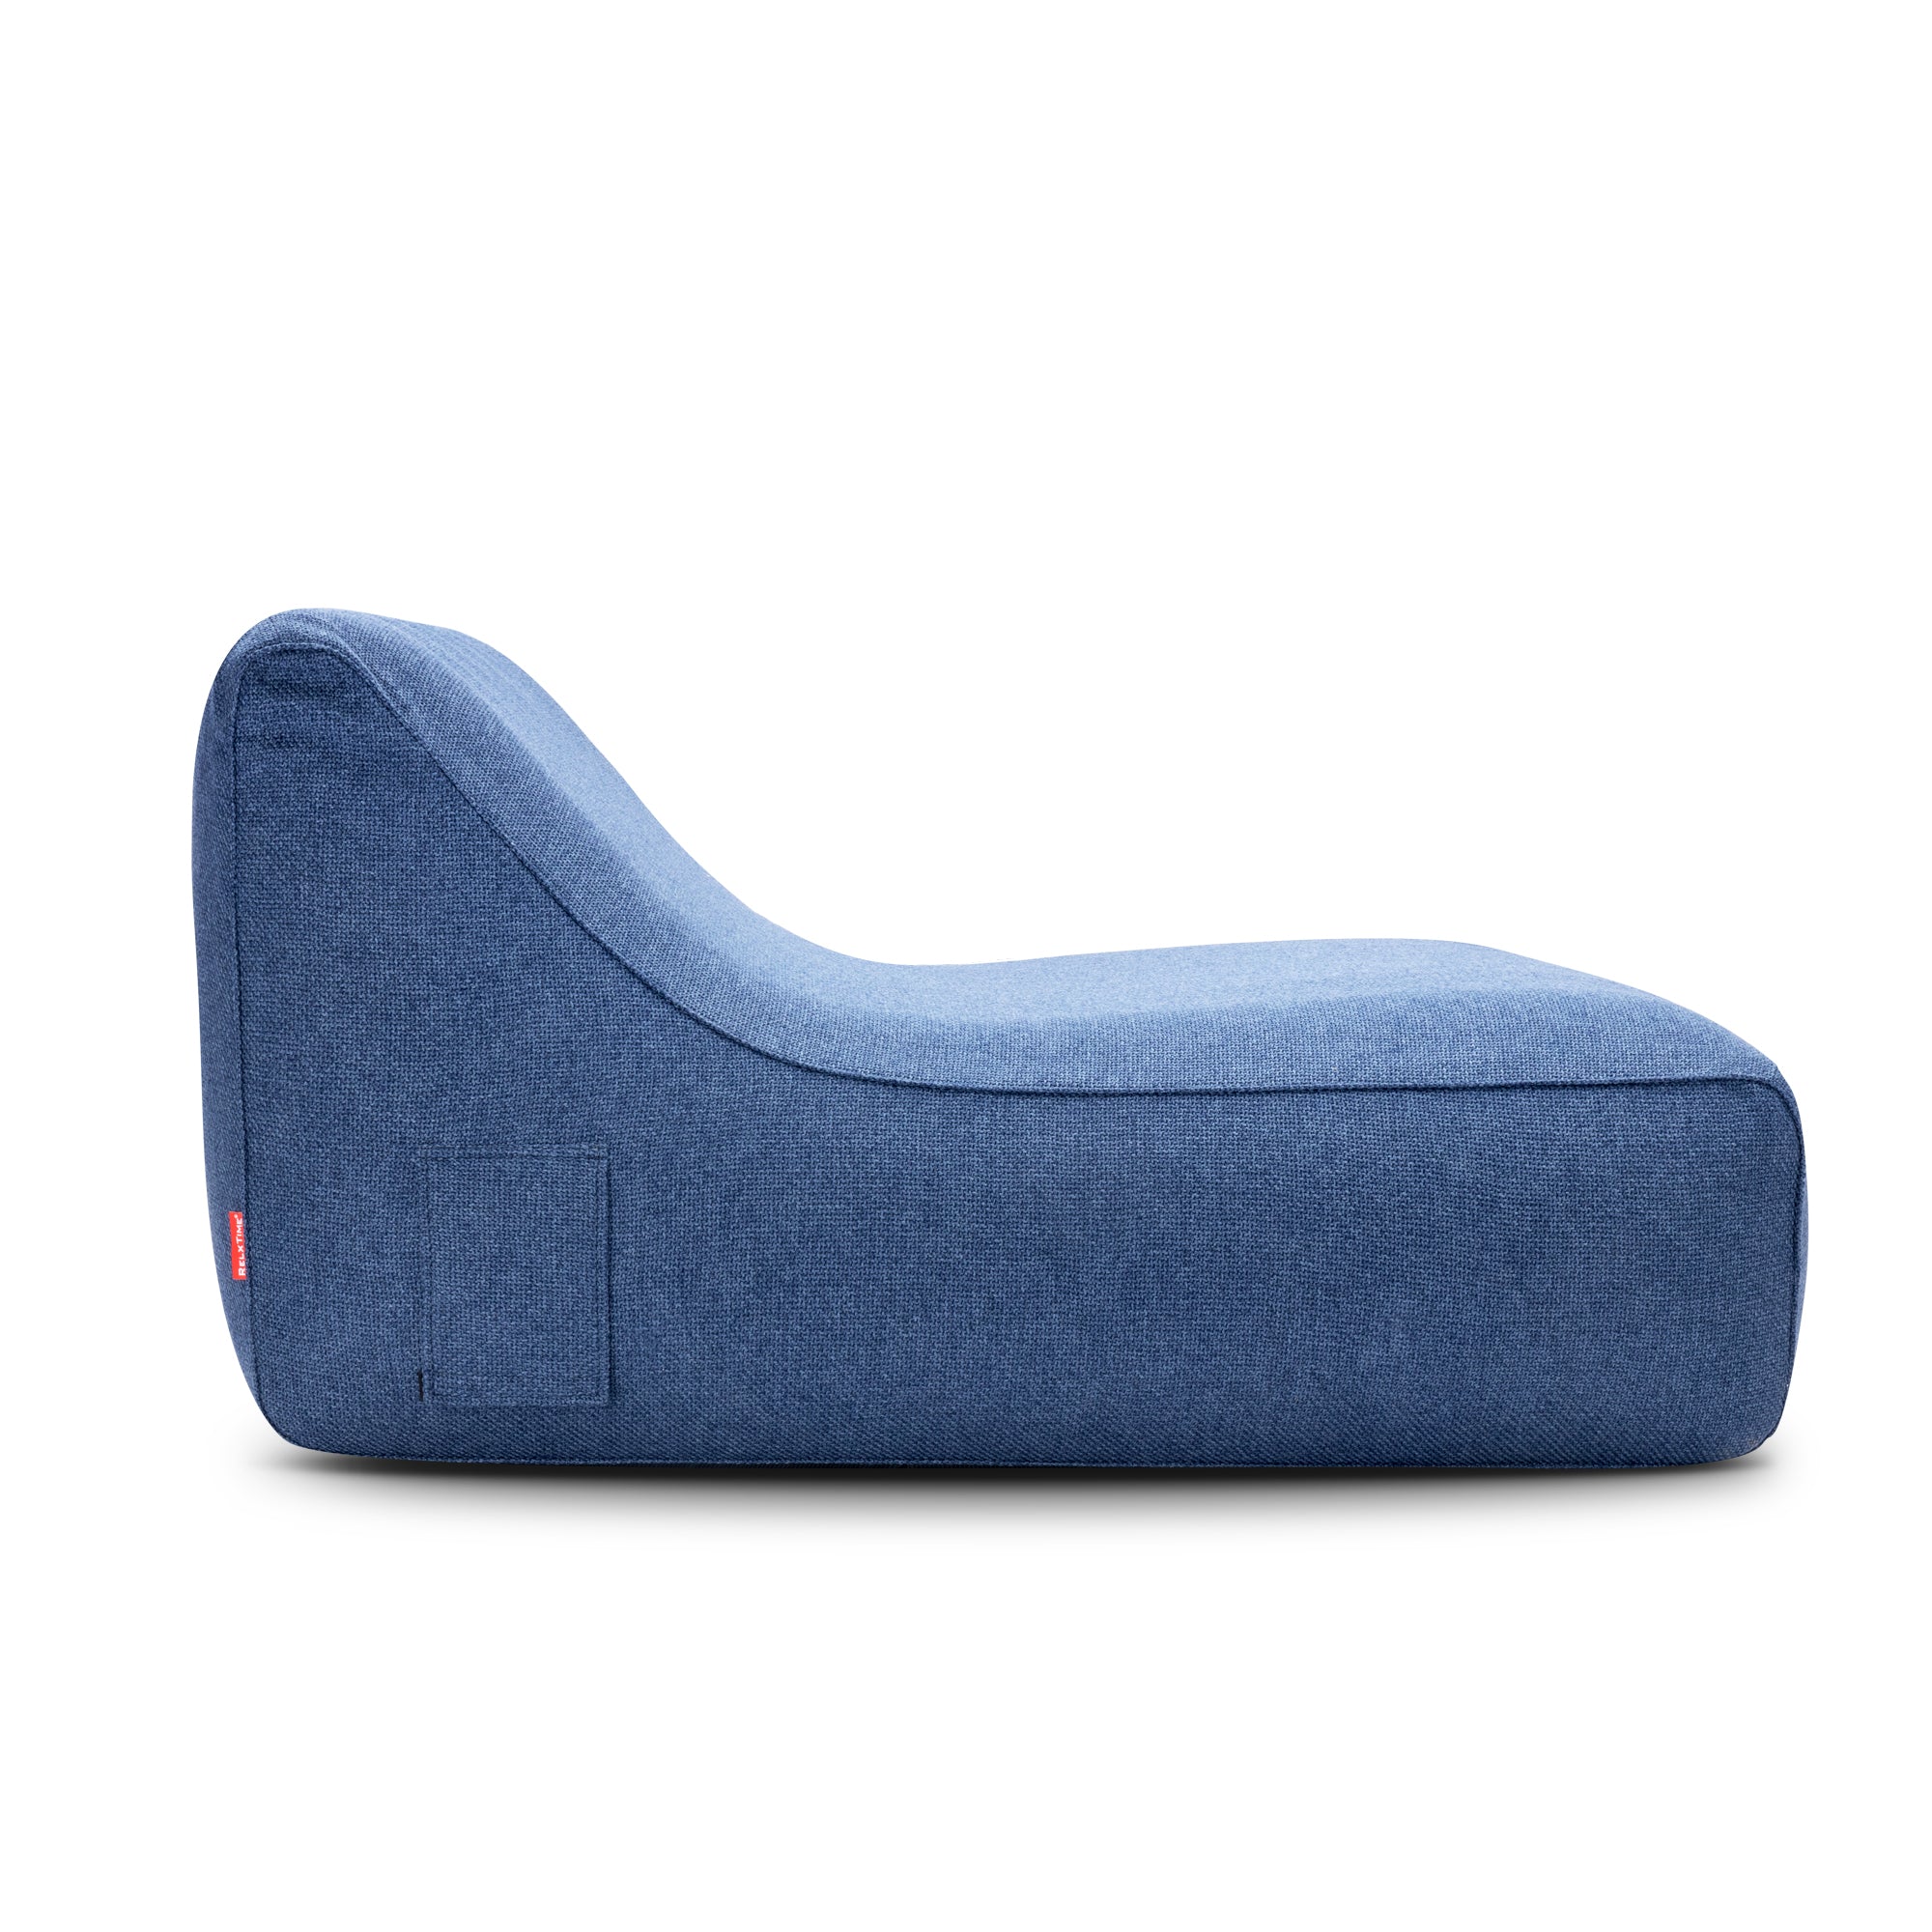 Relxtime Inflatable Sofa Couch Navy Blue with E-pump